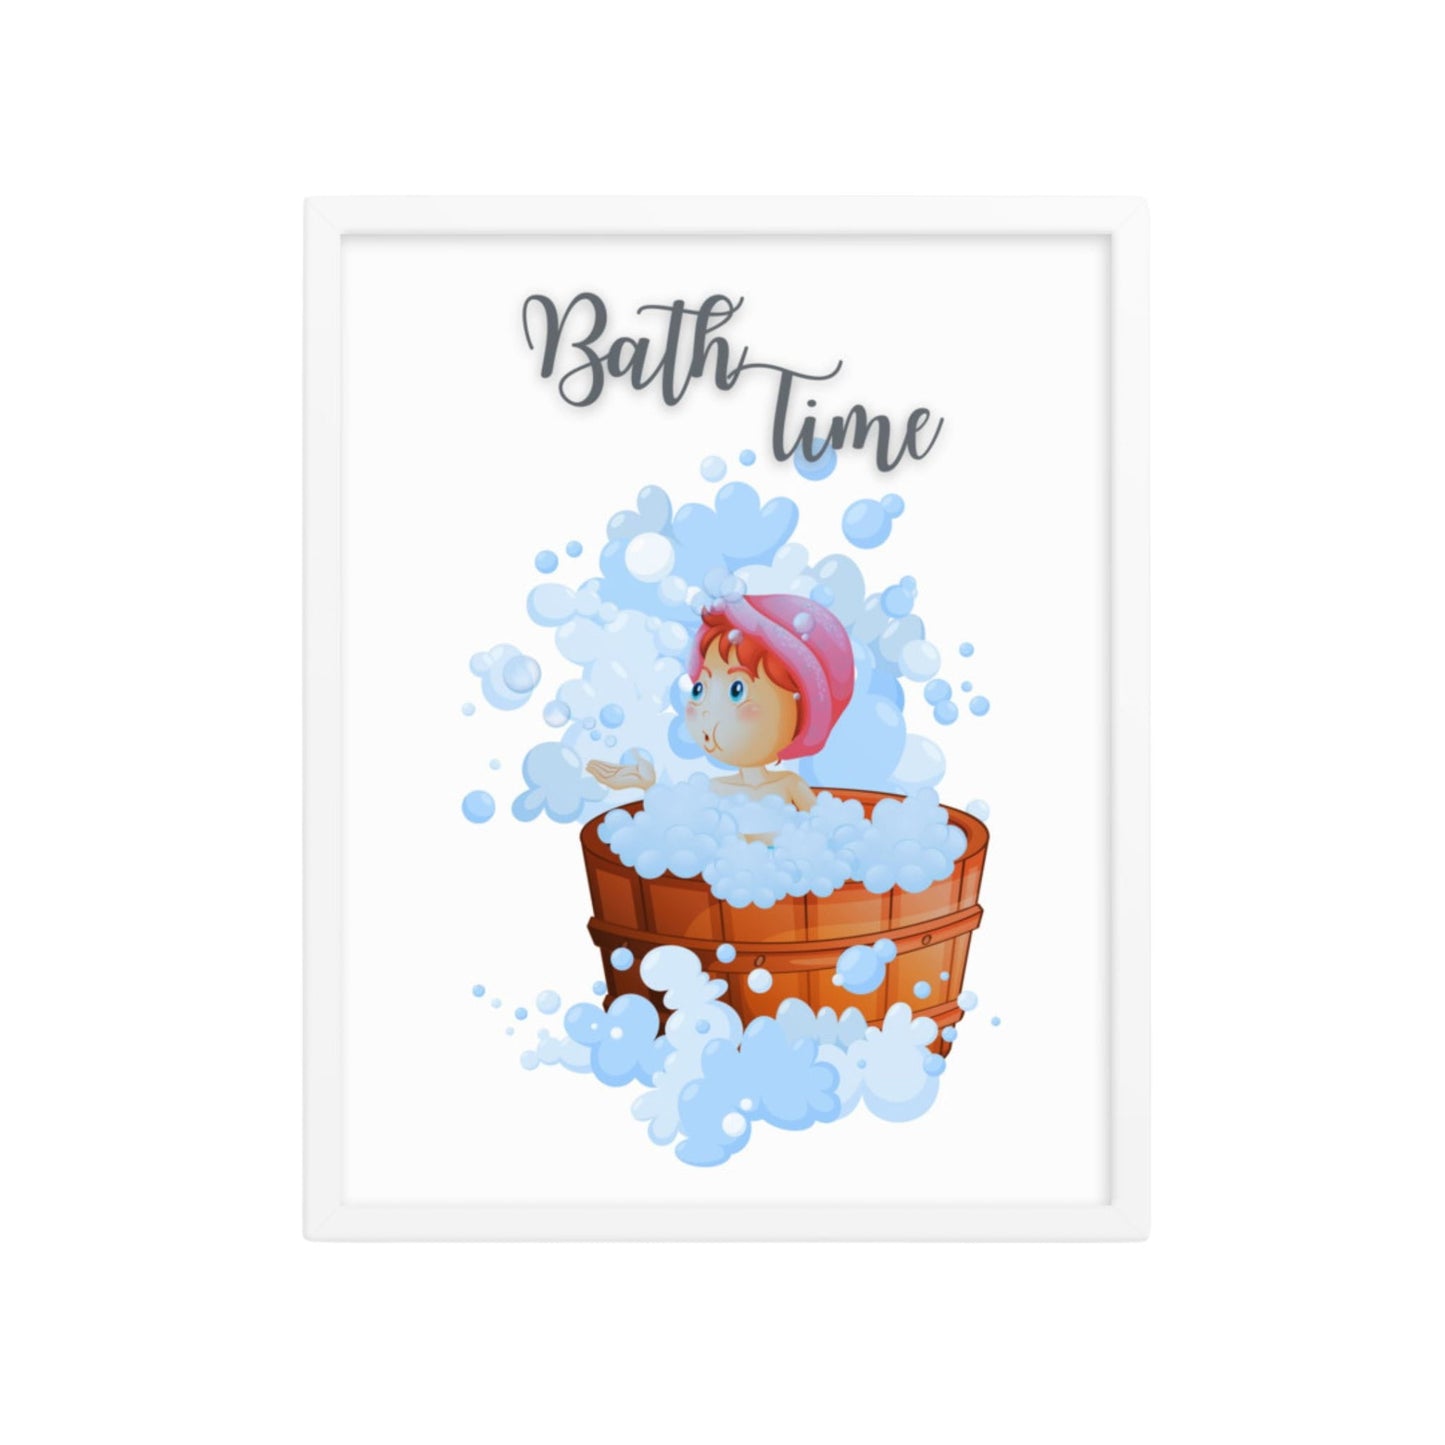 Bath Time Bubbles Framed Artwork - ZumBuys